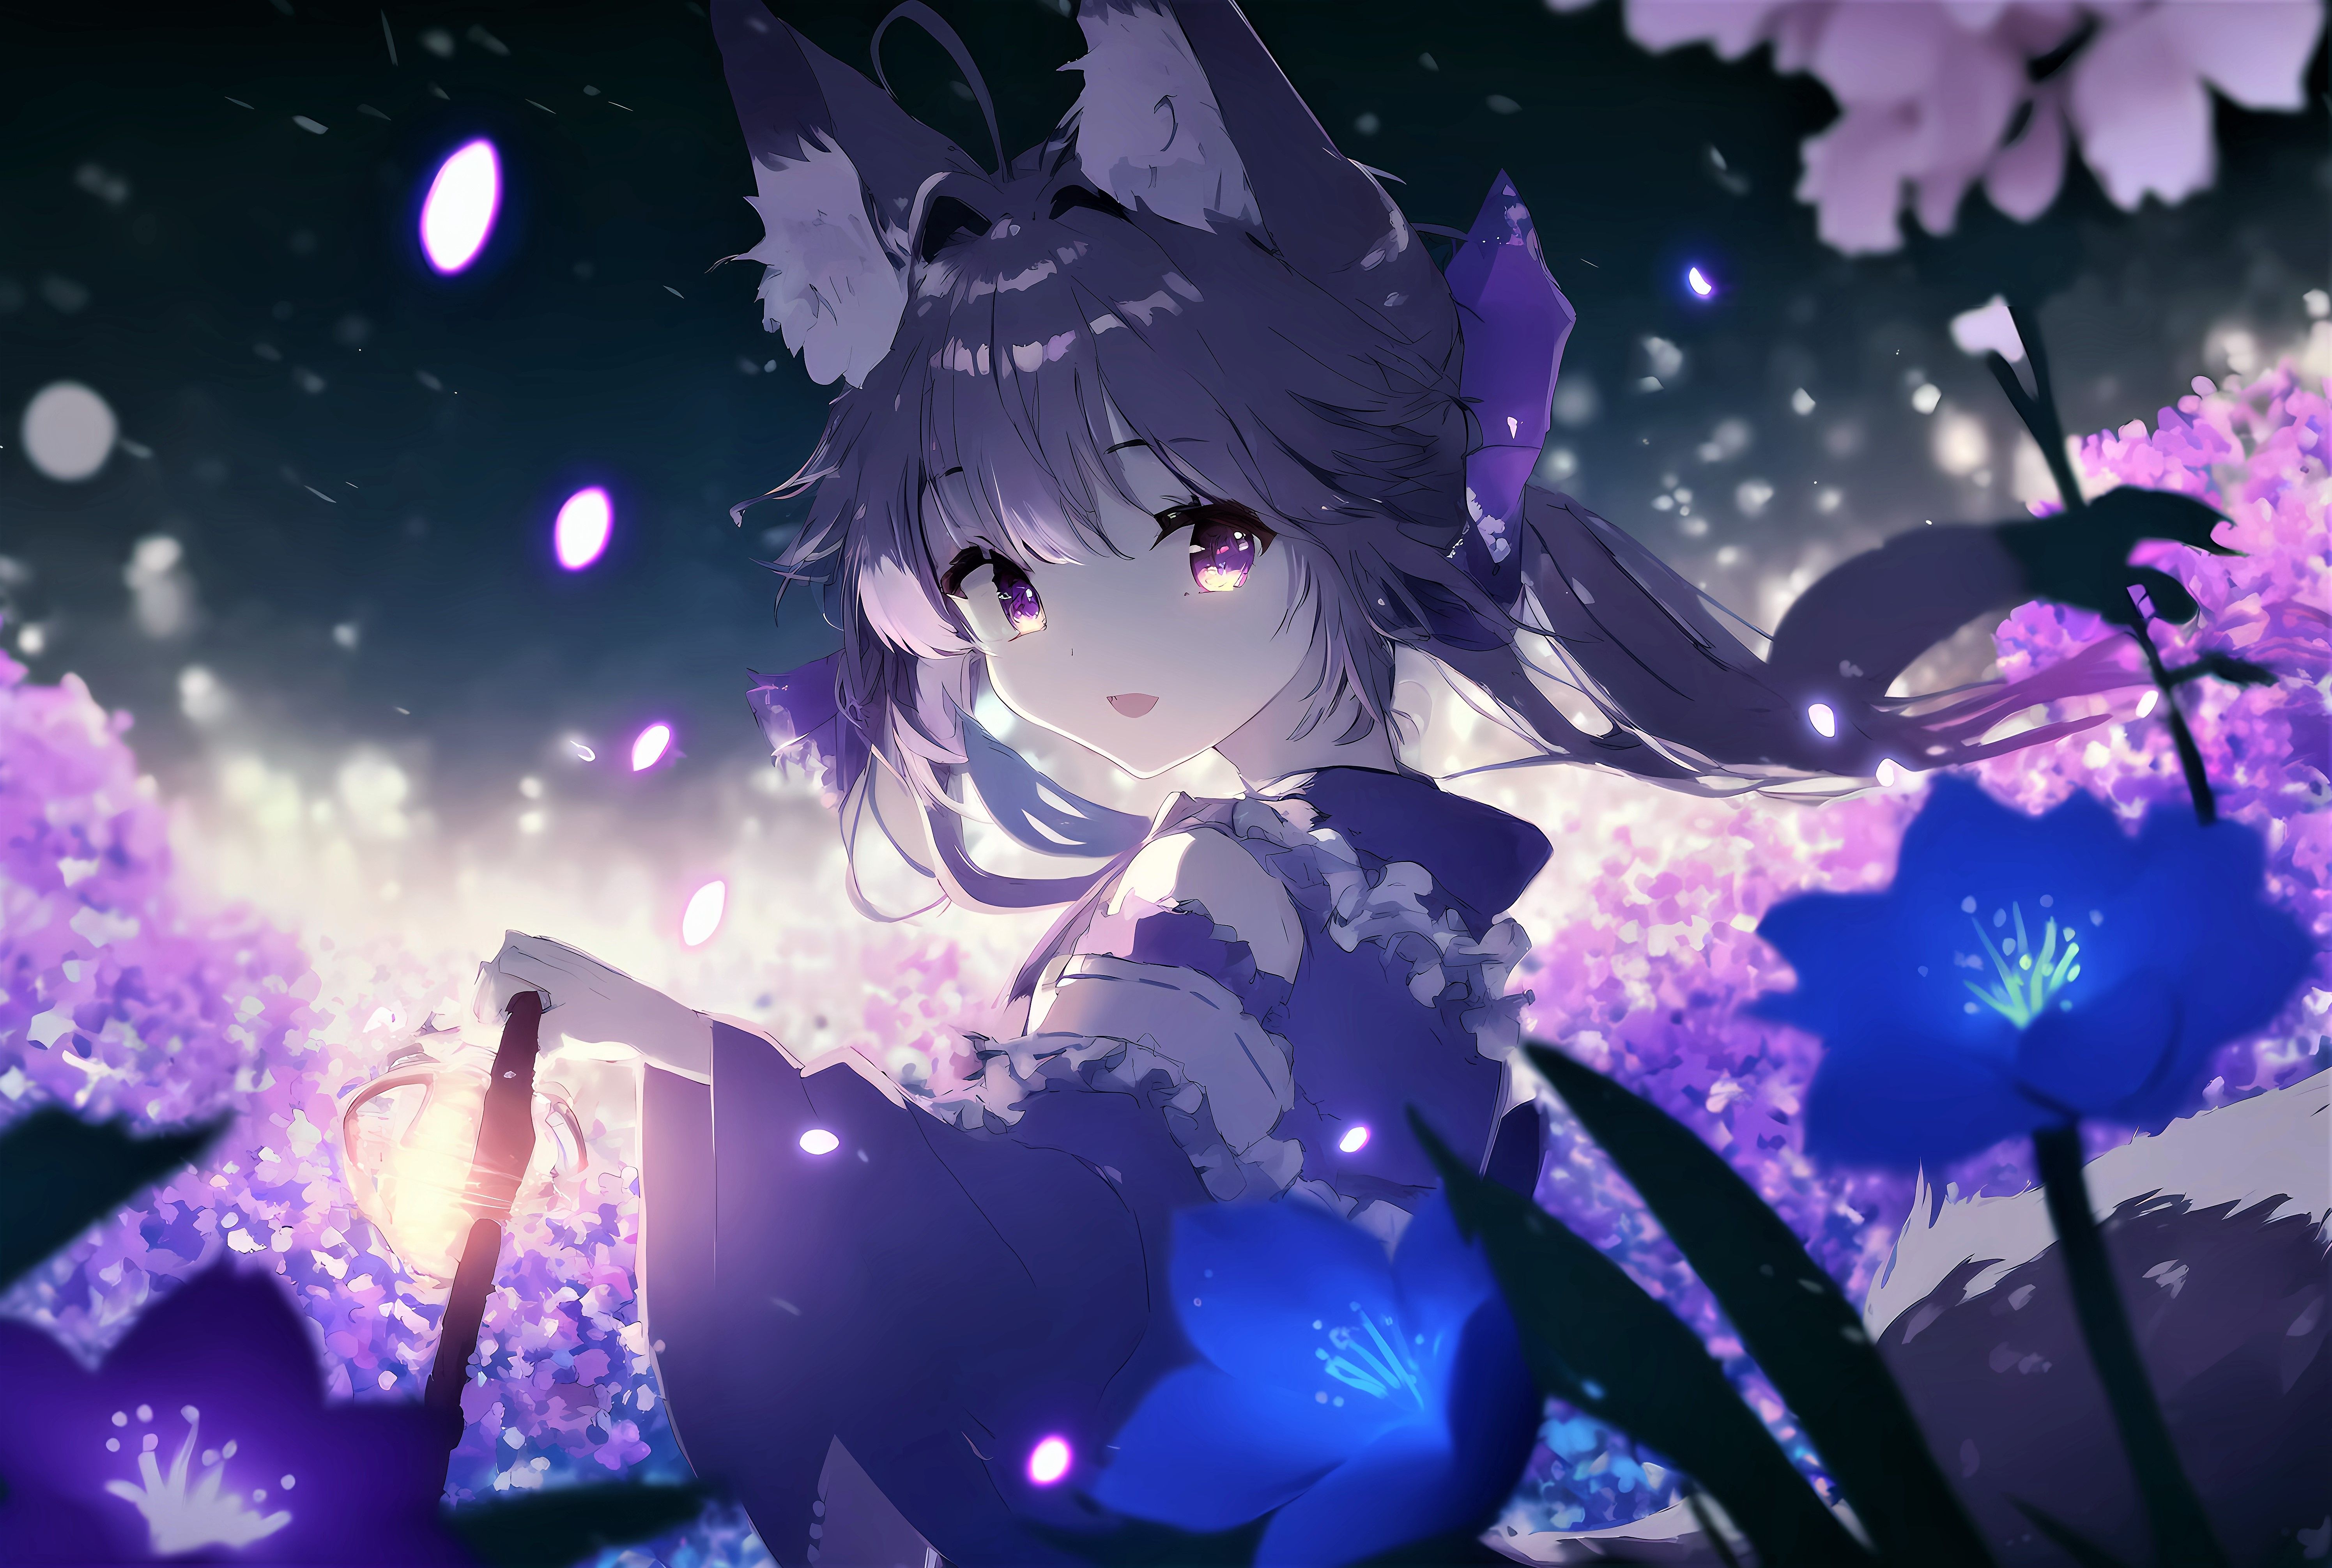 Nighttime anime girl with purple eyes and purple hair in a purple dress surrounded by purple flowers - Anime girl